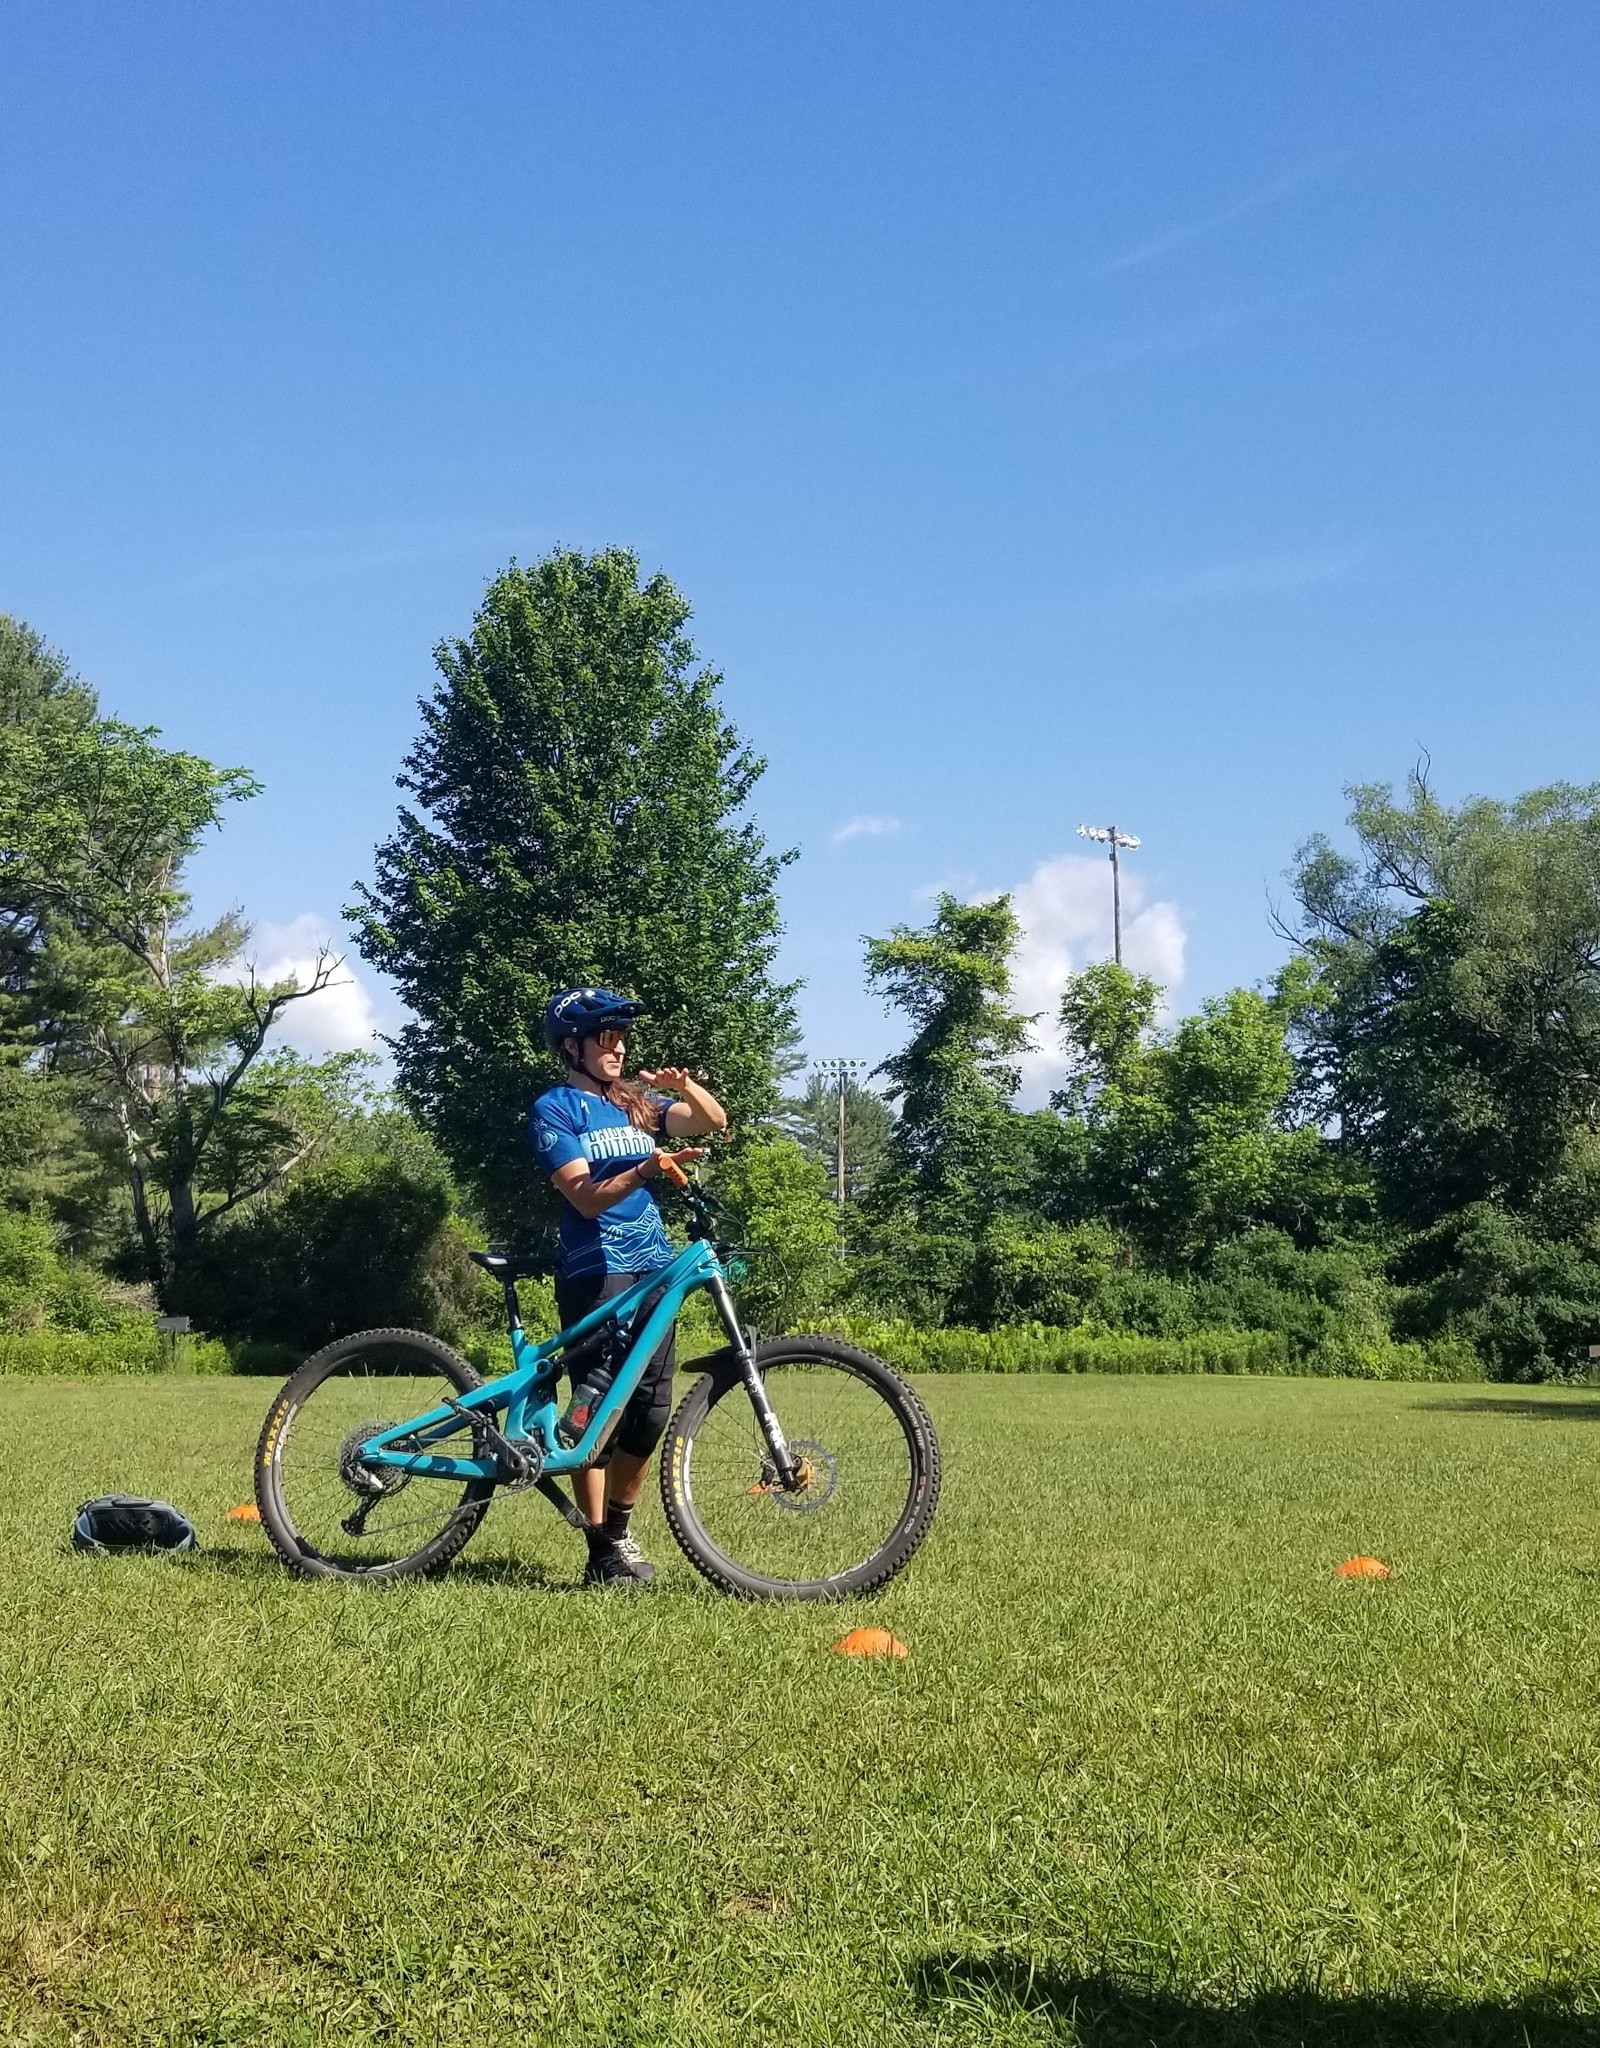 MTB Clinic Intro To Cornering - July 23rd 2022